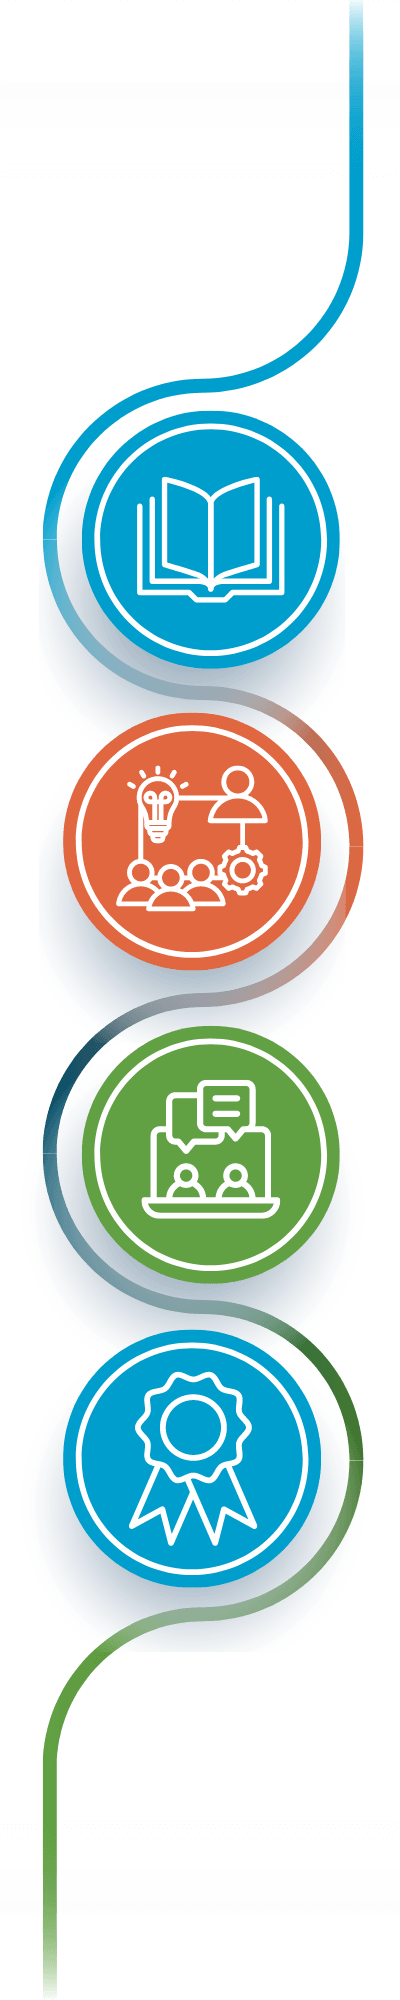 Credential Icon Graphic with four icons showing Interactive Training, Expert Consultation, Ongoing Coaching, and Earn Your Badge.